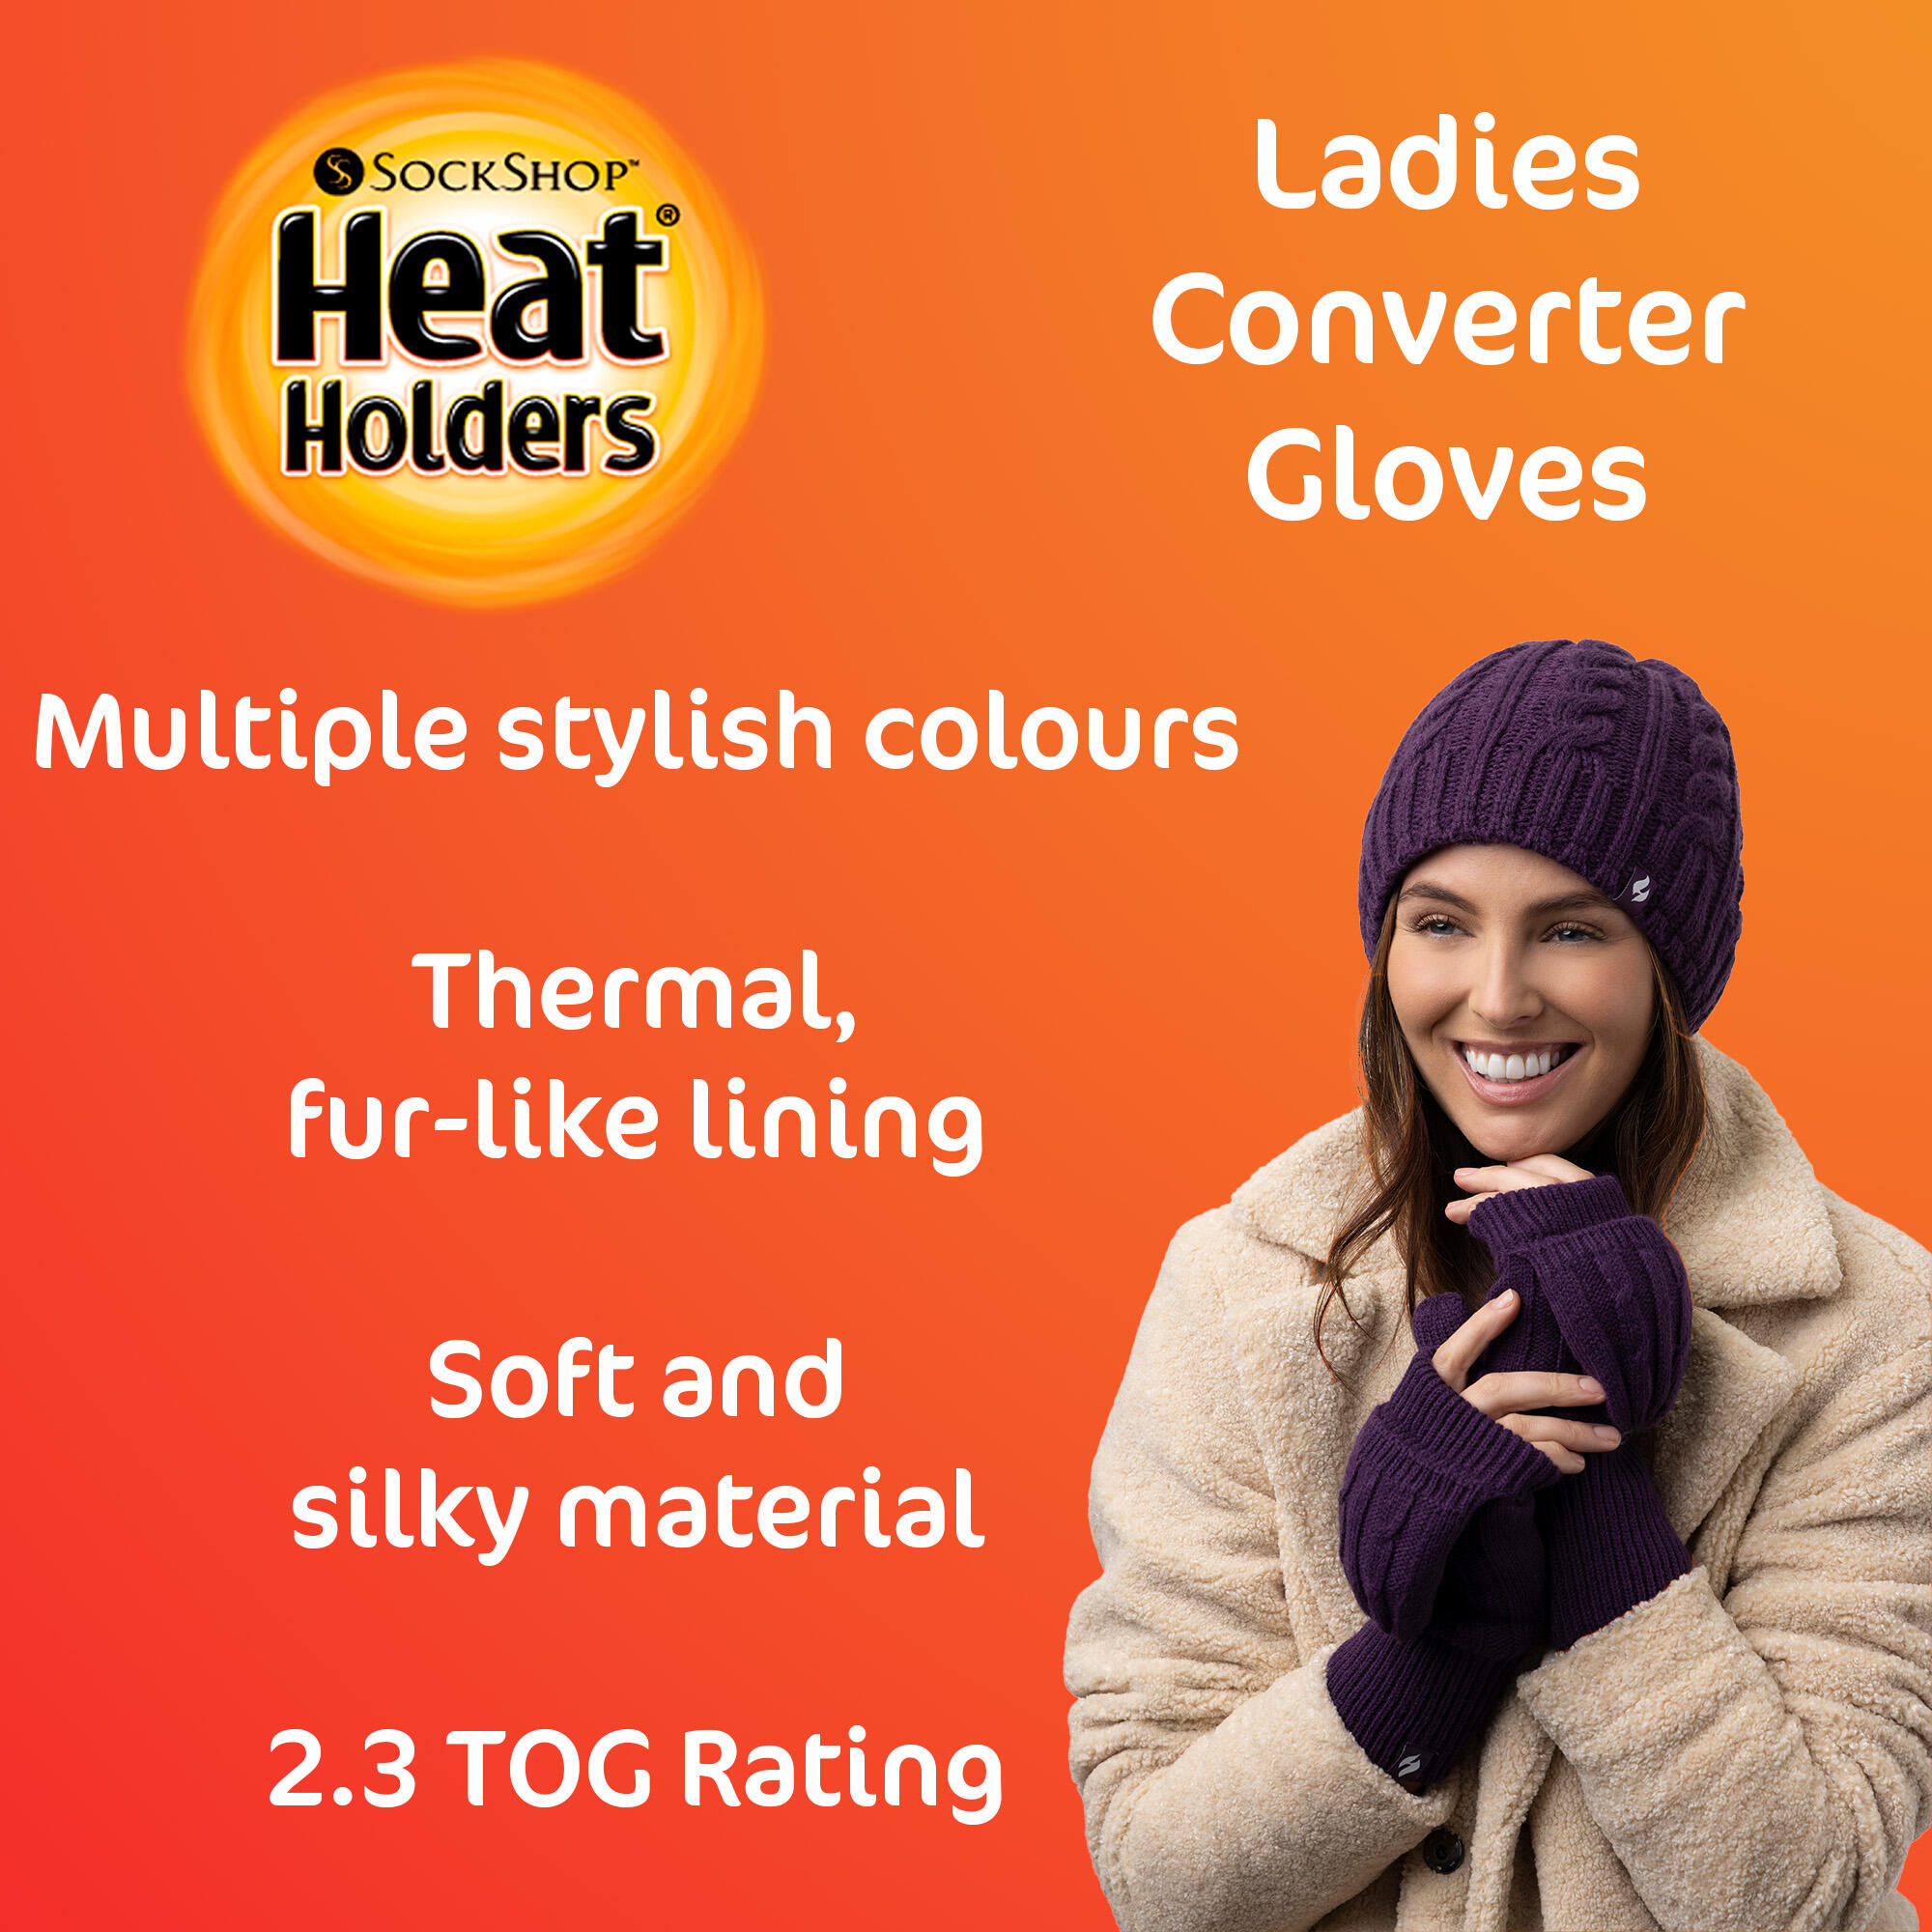 Ladies Cable Knit Winter 2.3 TOG Thermal Fingerless Converter Gloves 4/4